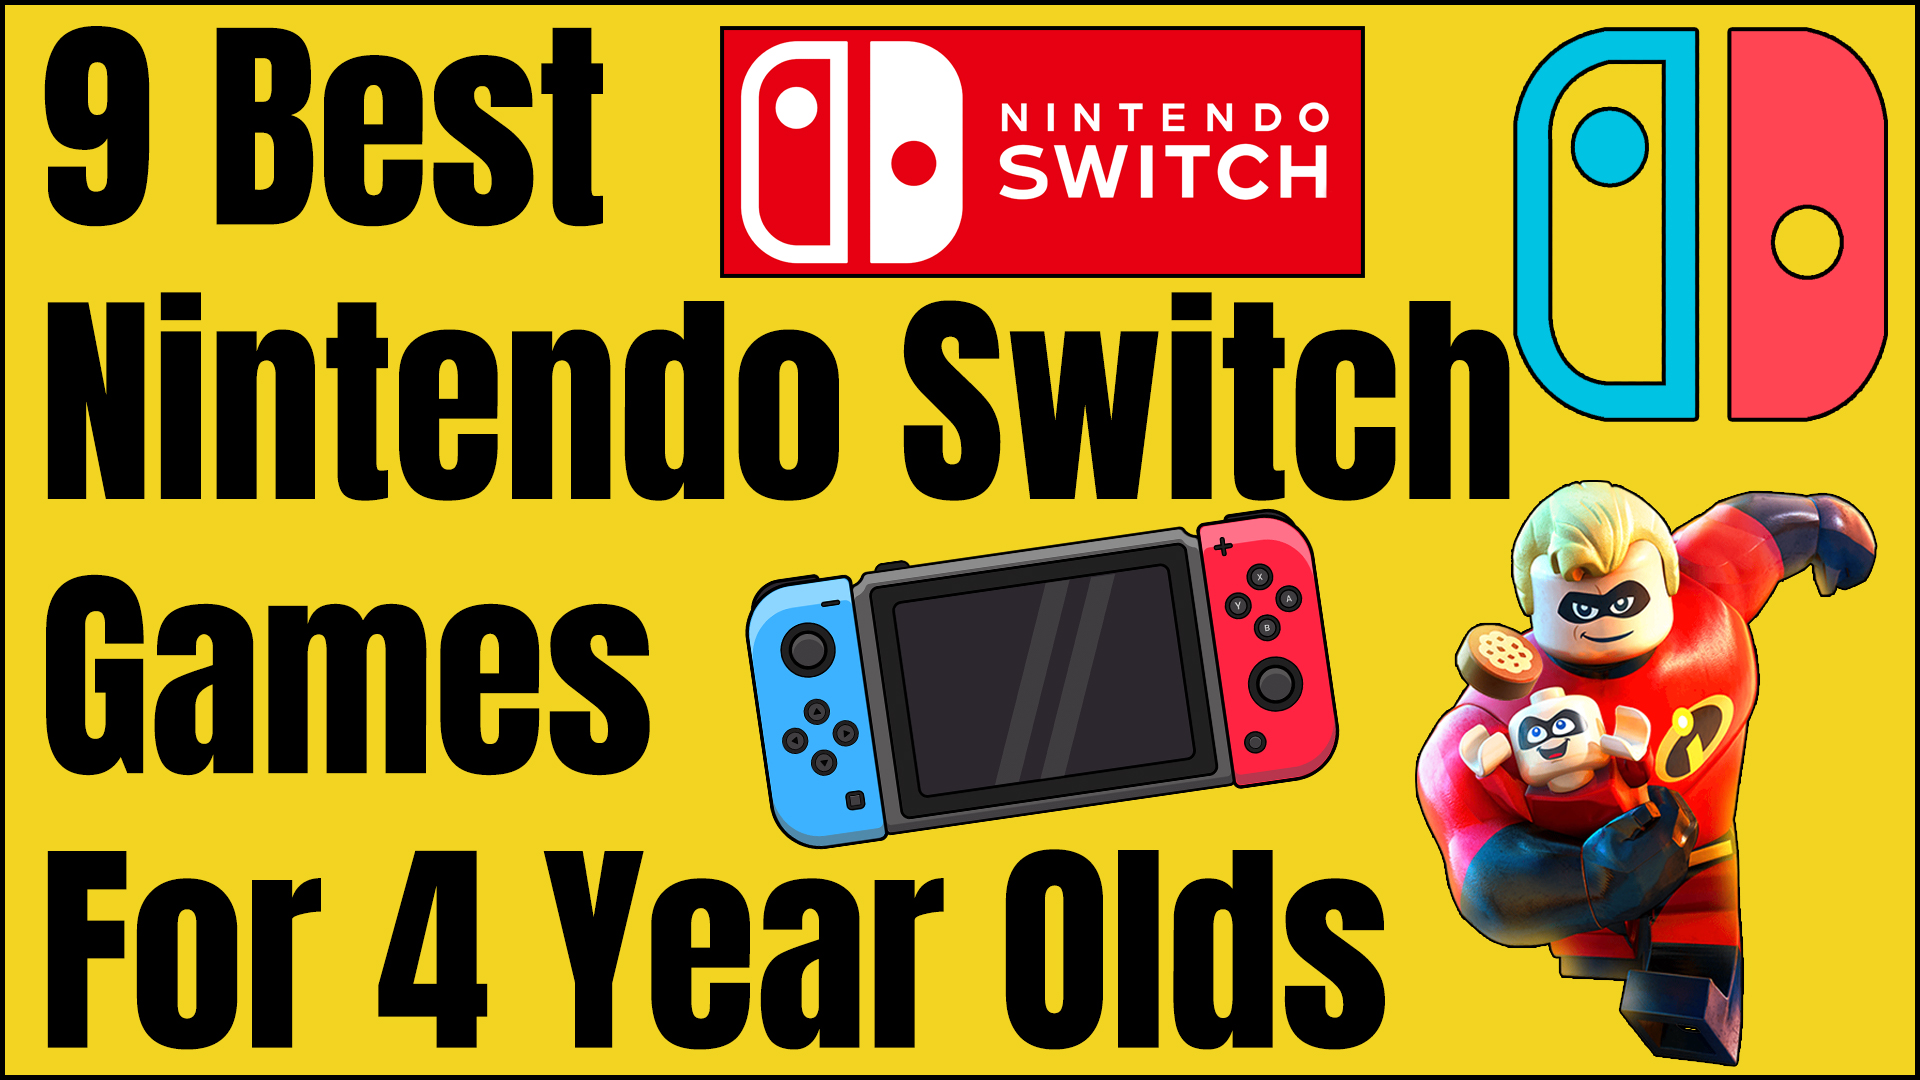 9 Best Nintendo Switch Games For 4 Year Olds